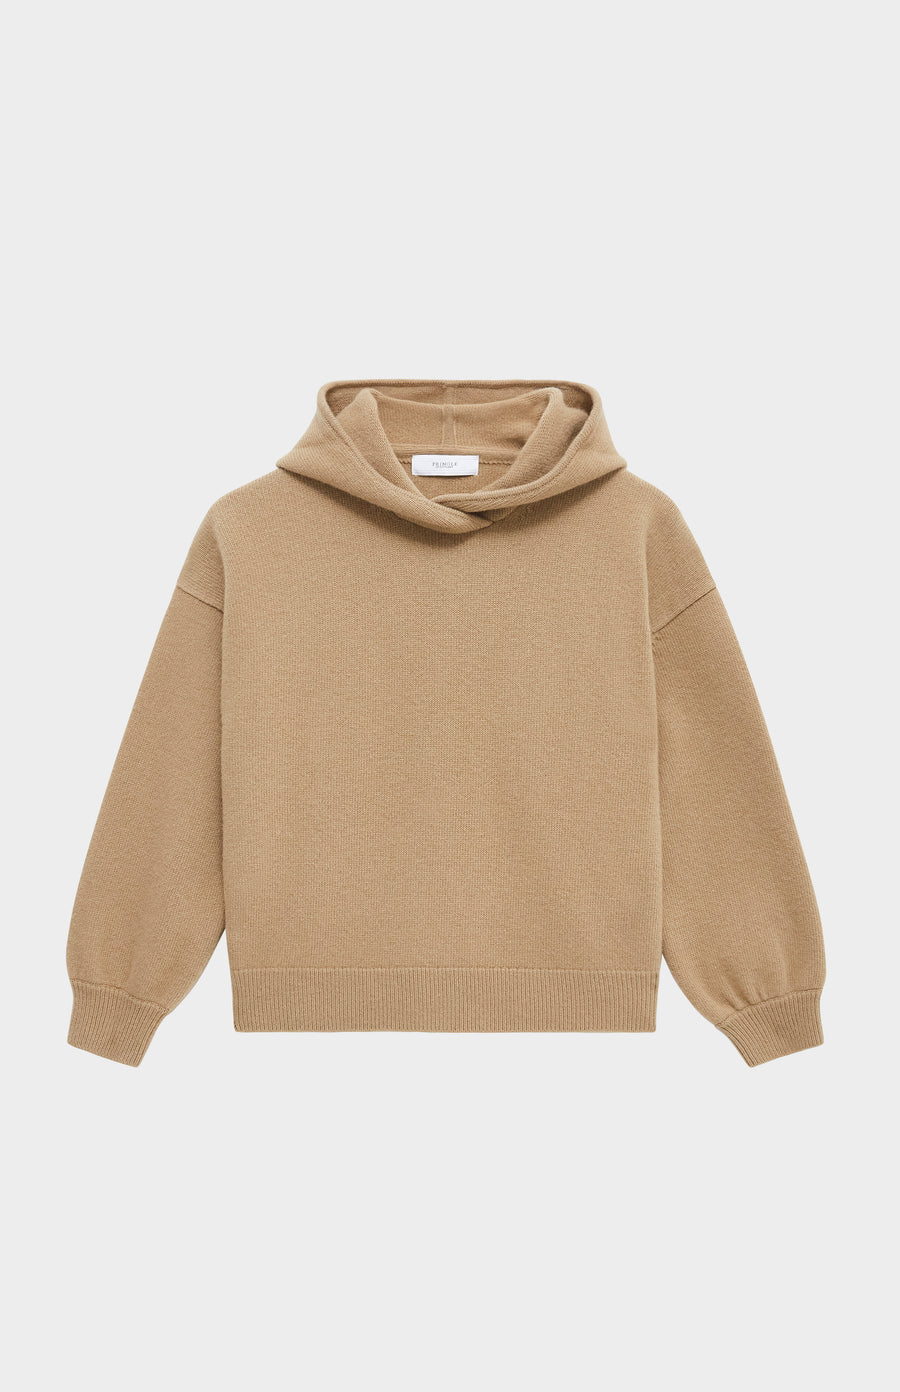 Pringle of Scotland Women's Cashmere Blend Hoodie In Camel